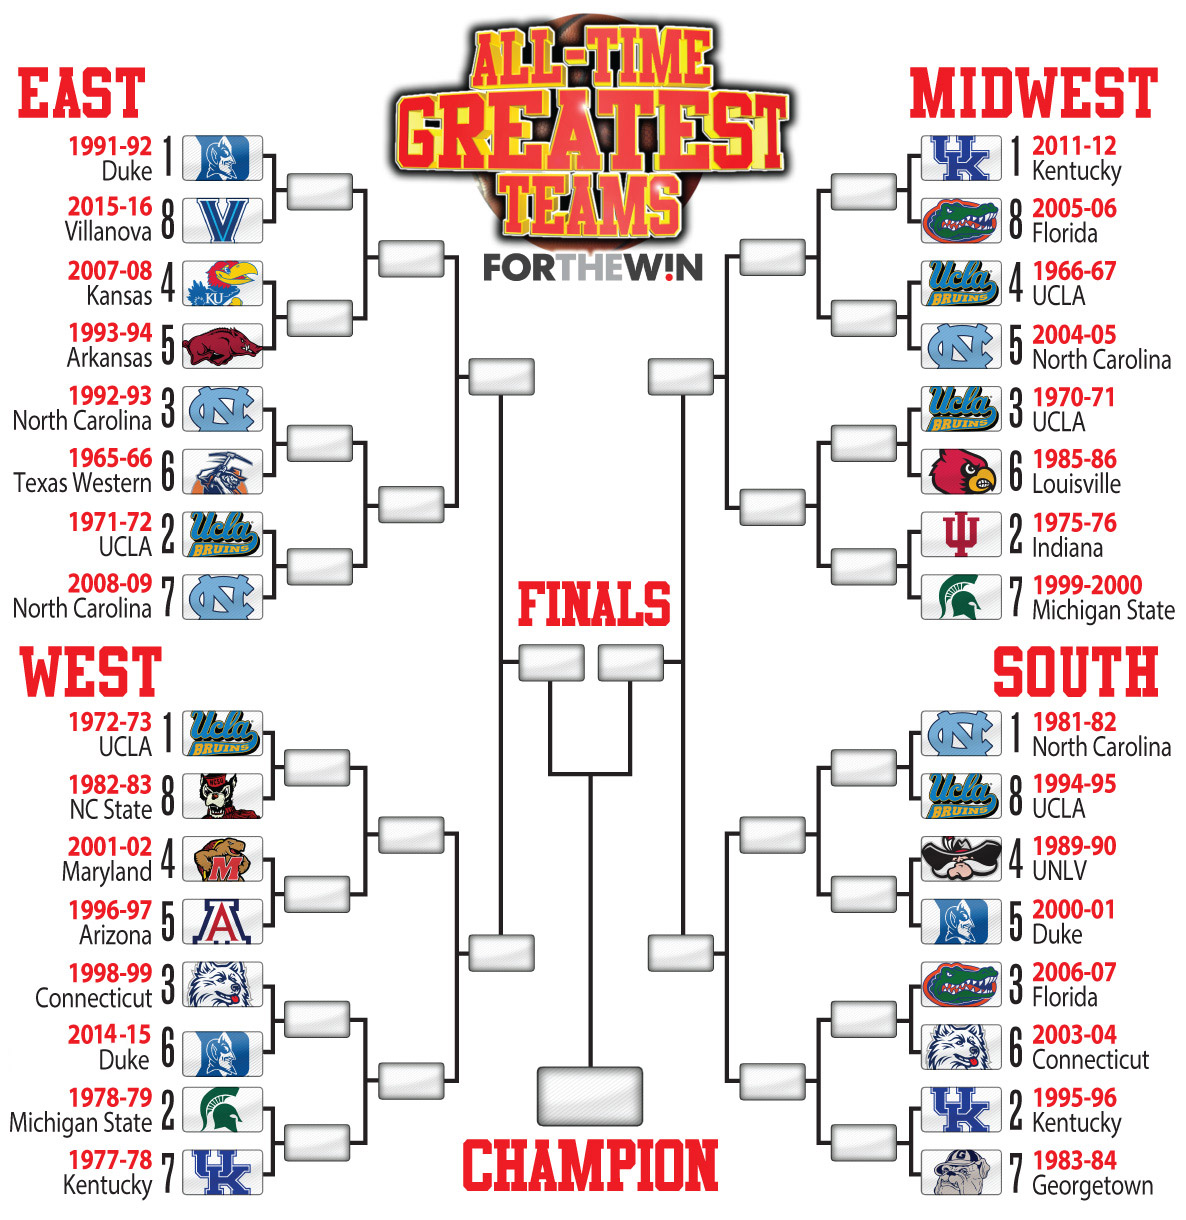 Bracket Madness: The greatest NCAA tournament team of all-time